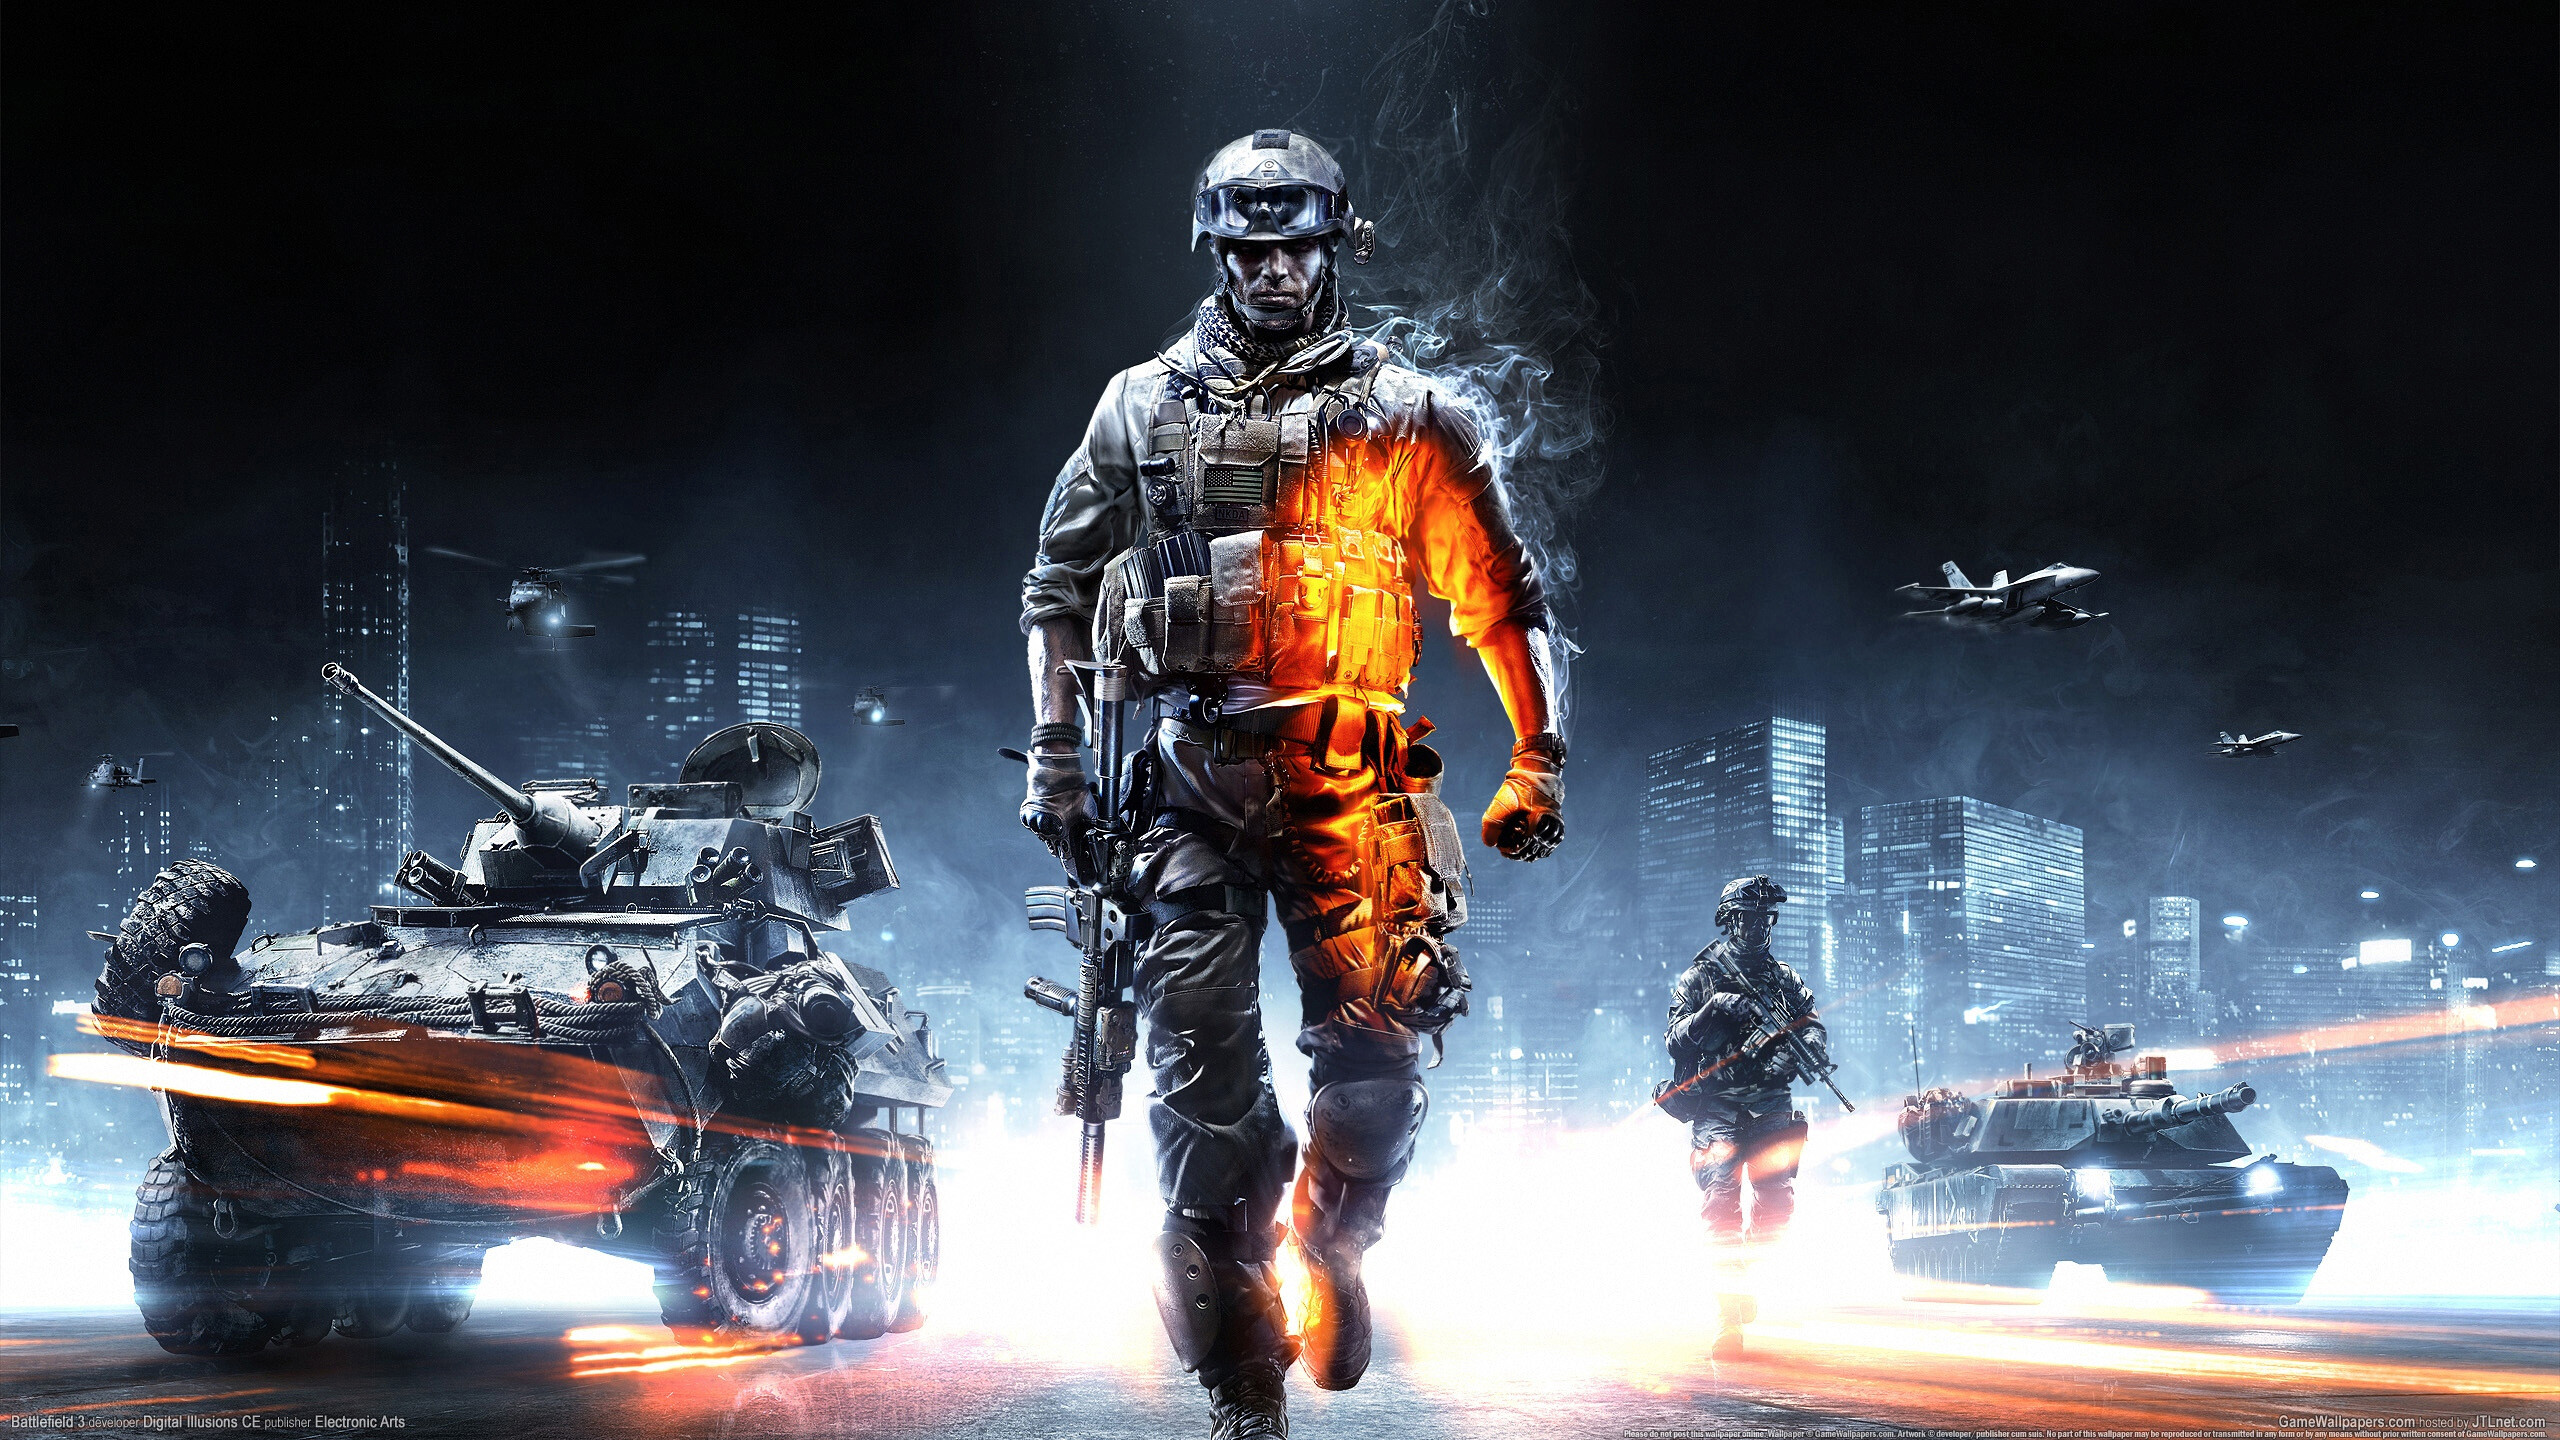 Battlefield 3: A first-person shooter in which players assume the role of a U.S. Marine soldier who is on trial for treason. 2560x1440 HD Background.